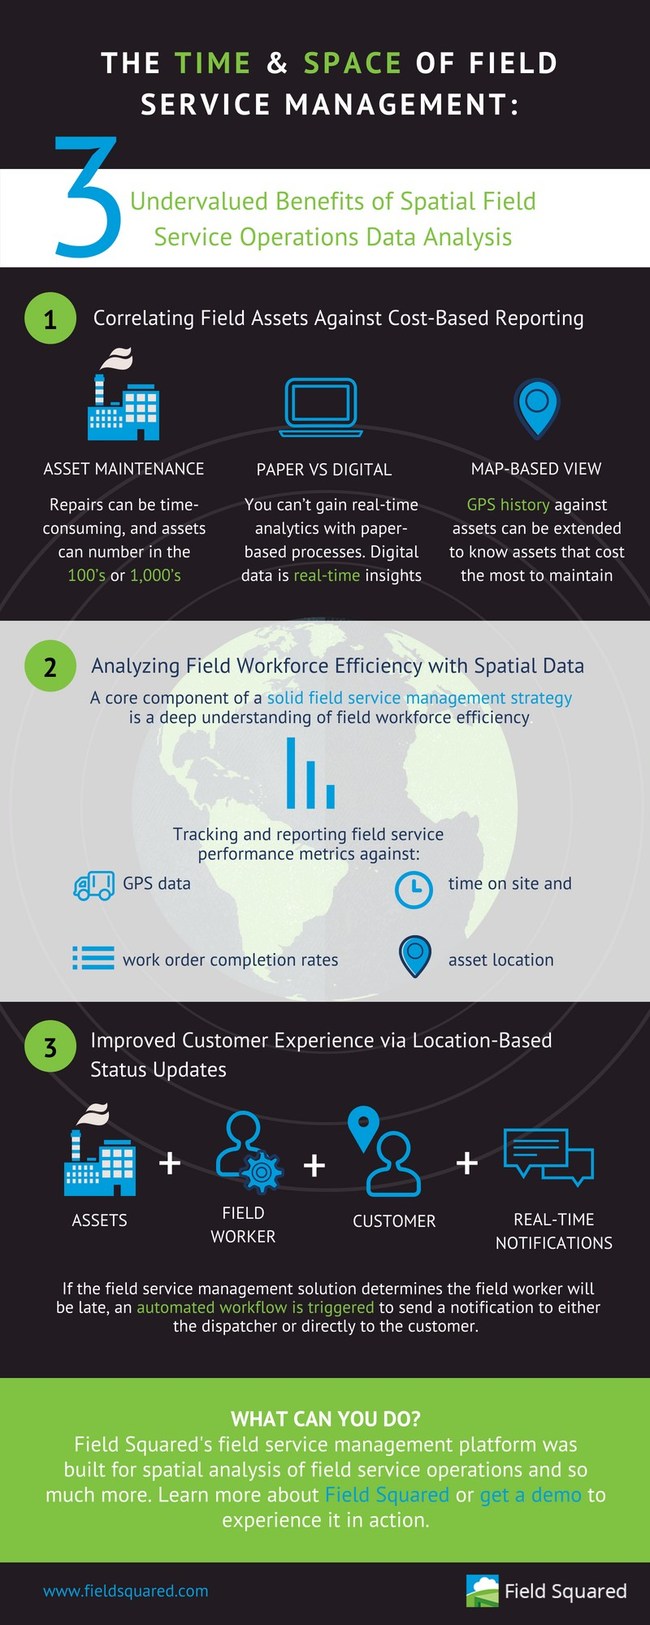 Field Squared Releases Infographic on Three Benefits of ...